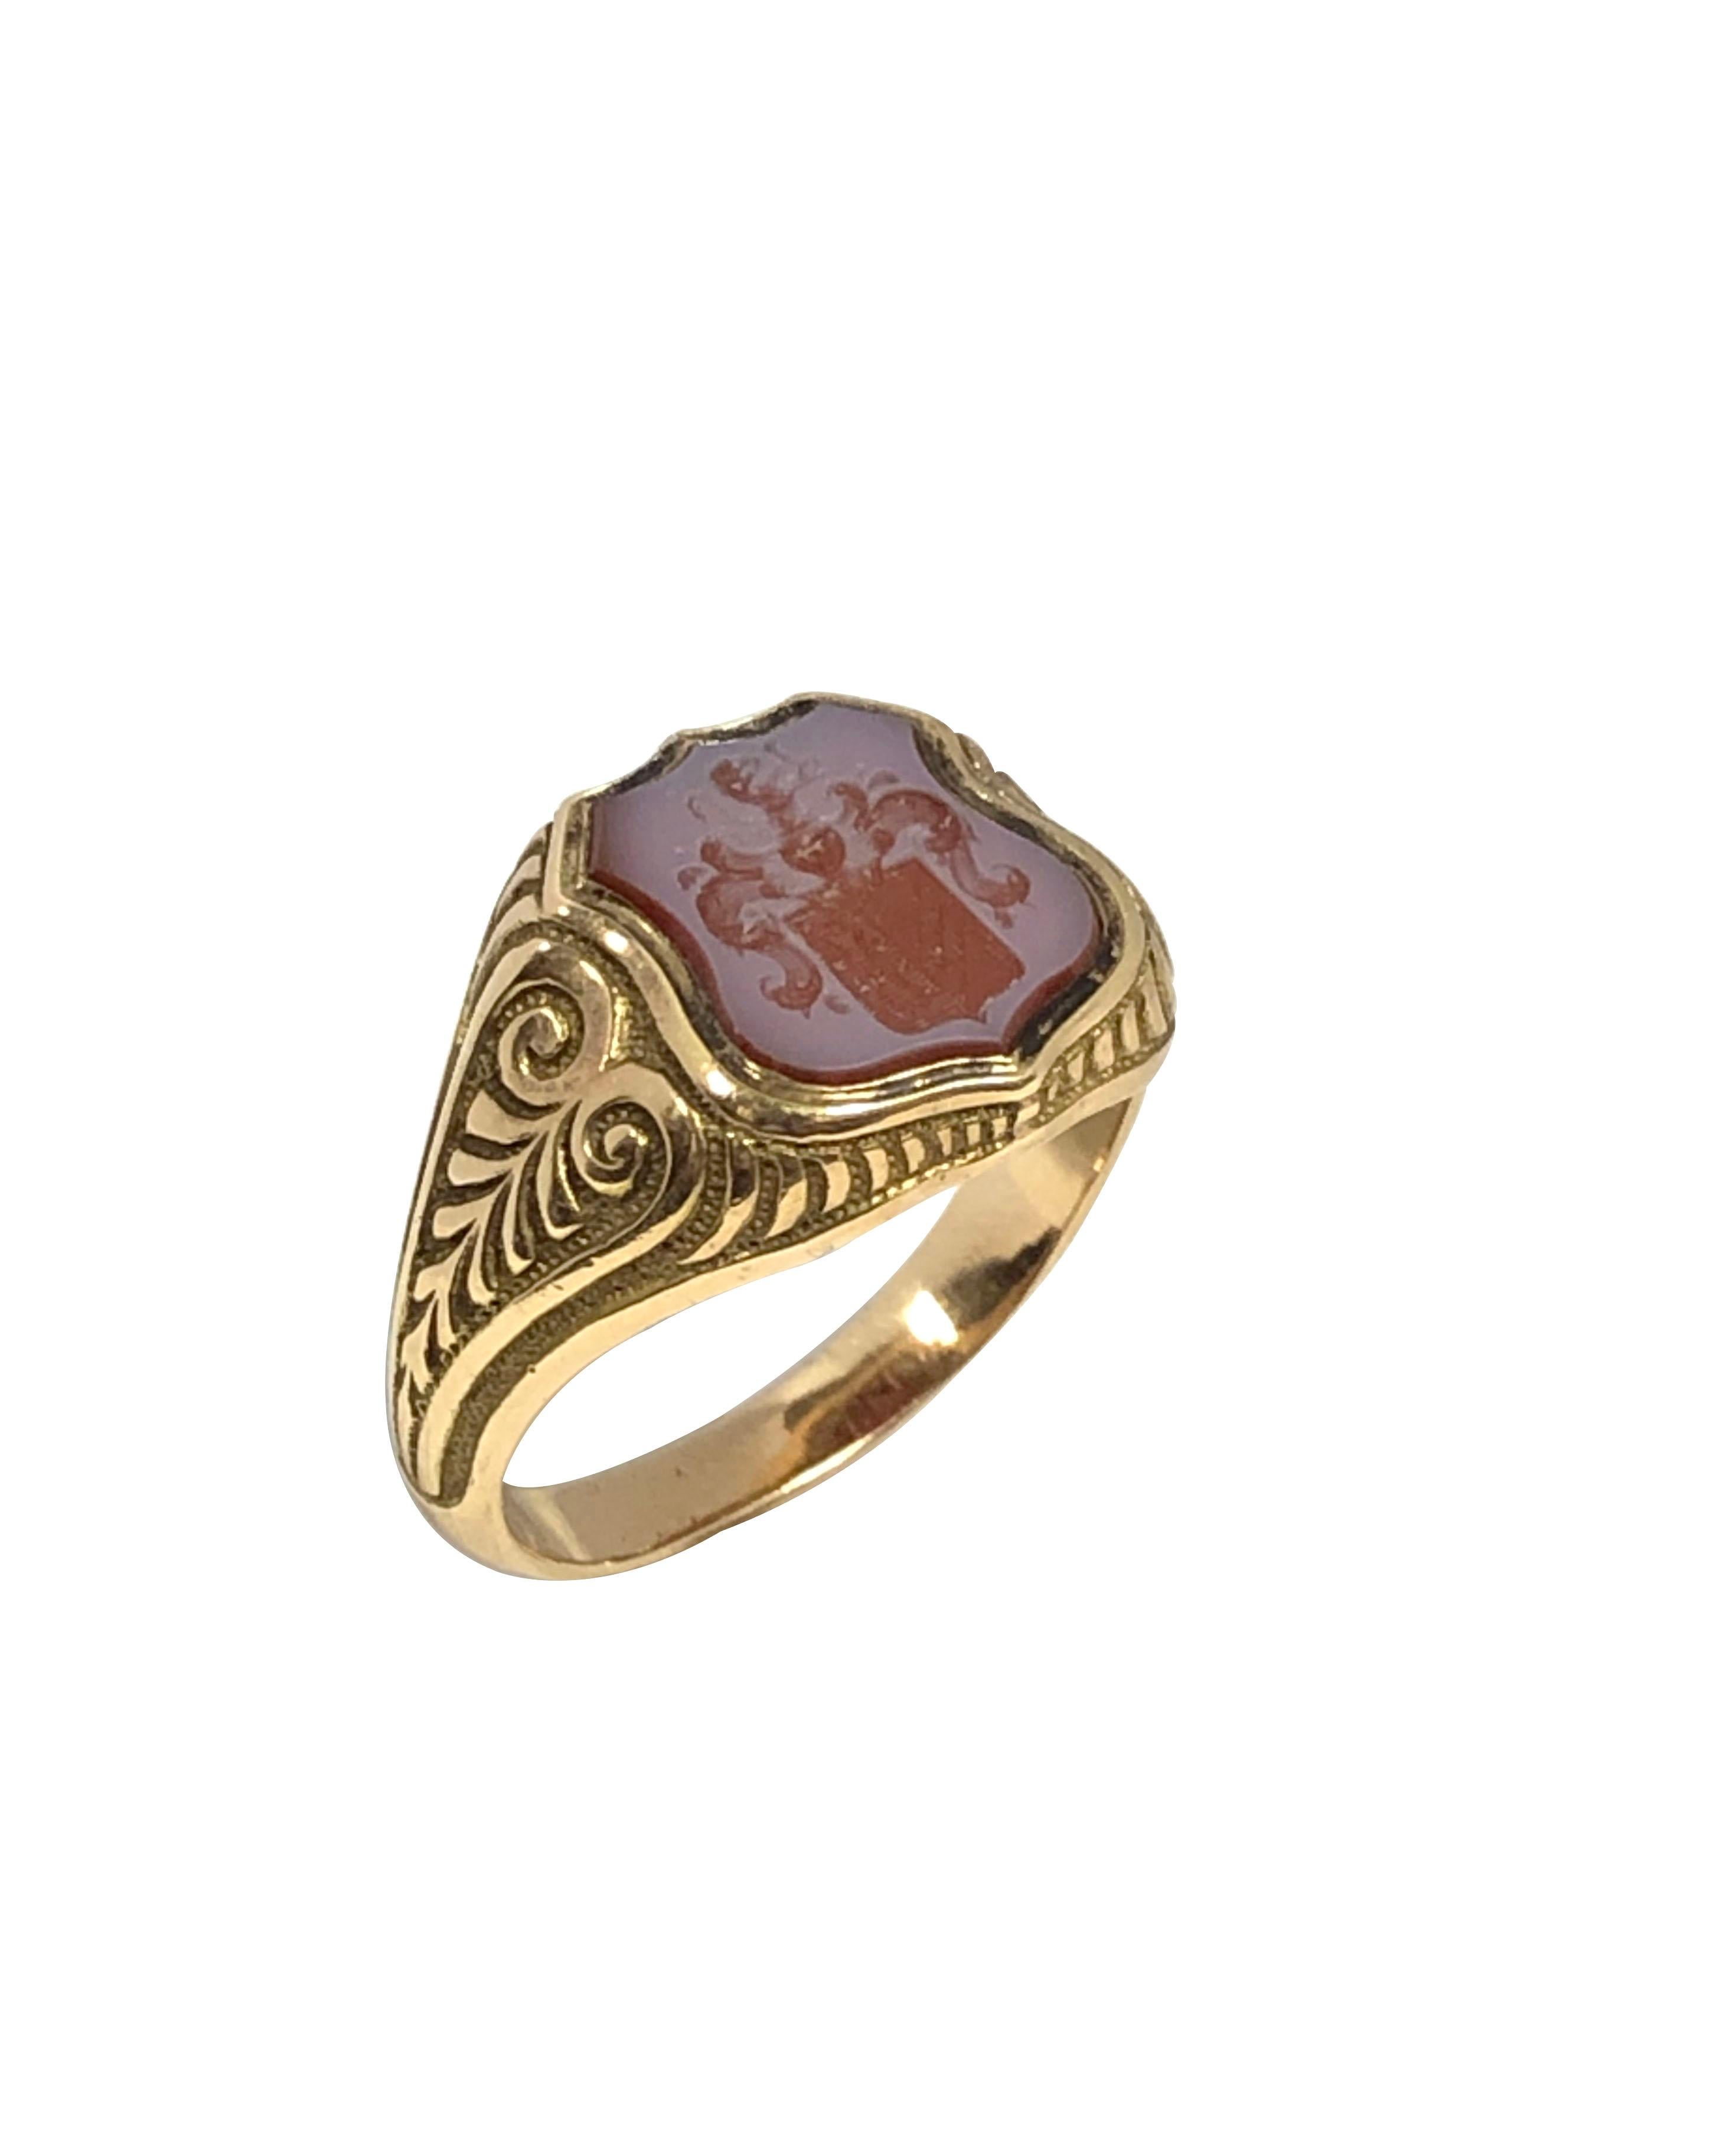 Circa 1890s 14K Yellow Gold Signet Ring, Having a Shield Shape deep carved Hard Stone Agate with a Shield Crest, Hand chased Gold work on the sides. finger size 8 1/2. 